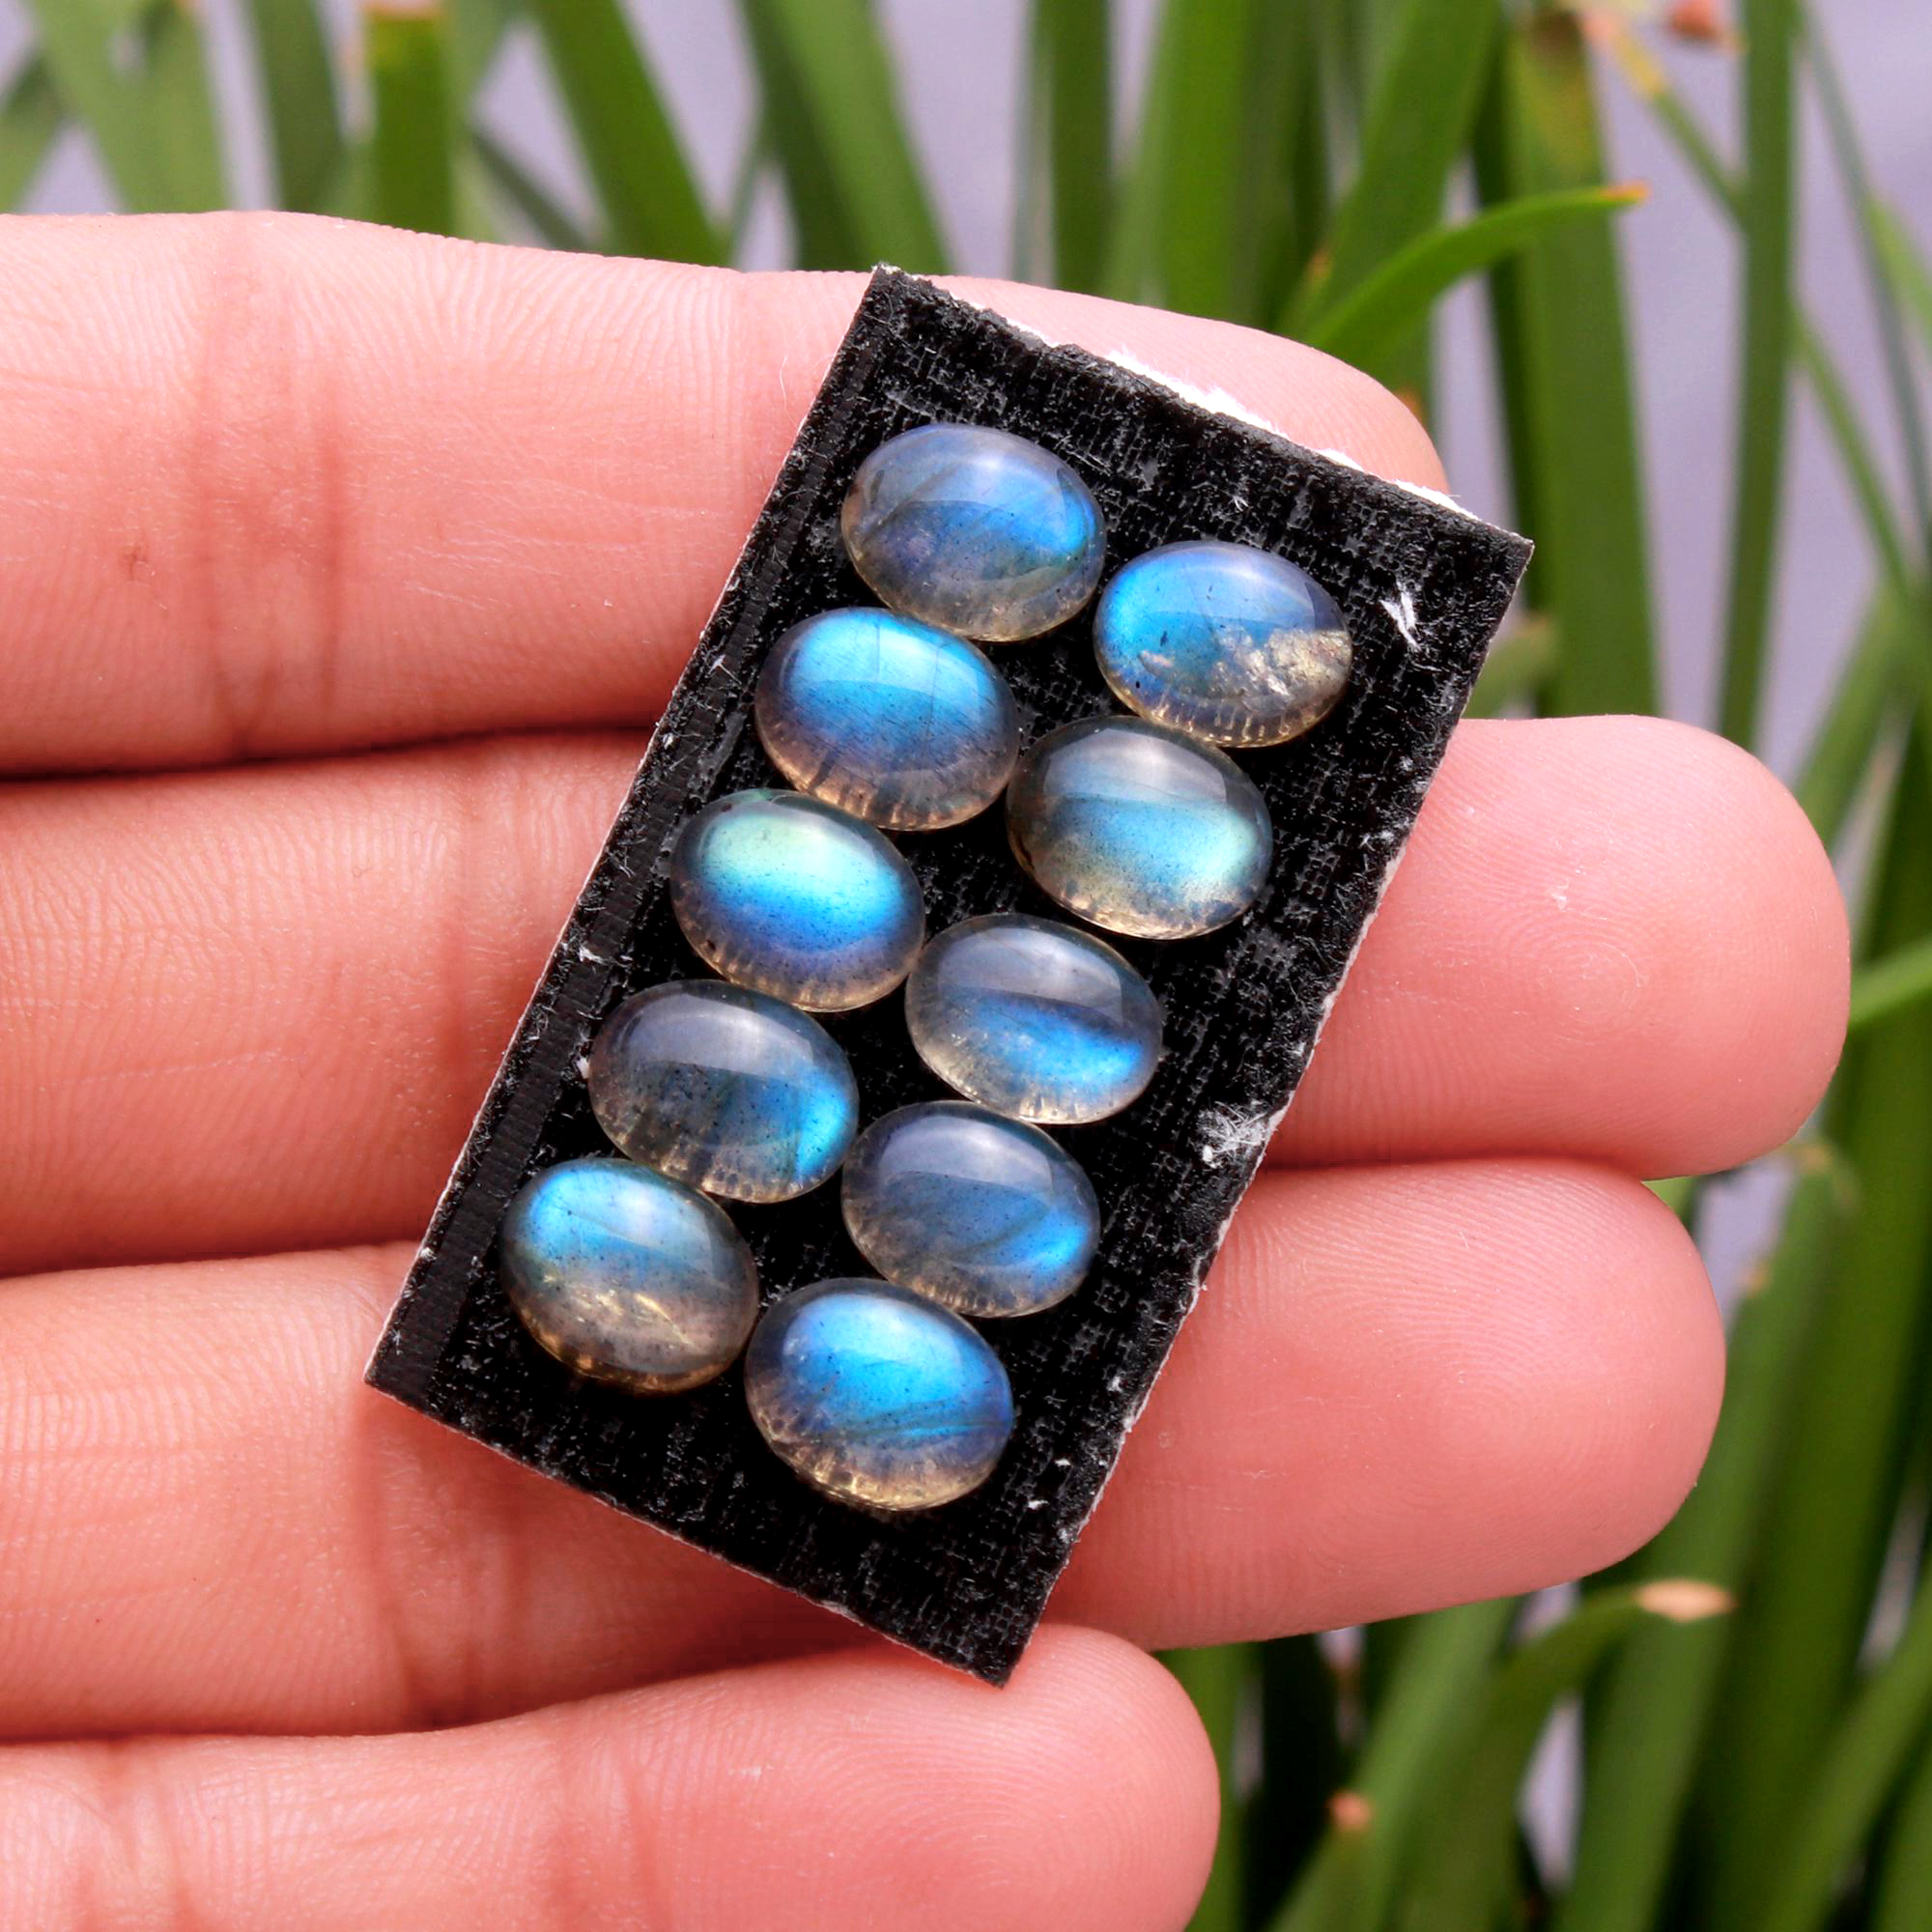 10 Pcs 23.10 Cts Natural Celibrated Labradorite Oval Cabochons Loose Gemstone Wholesale Lot Size 9x7mm